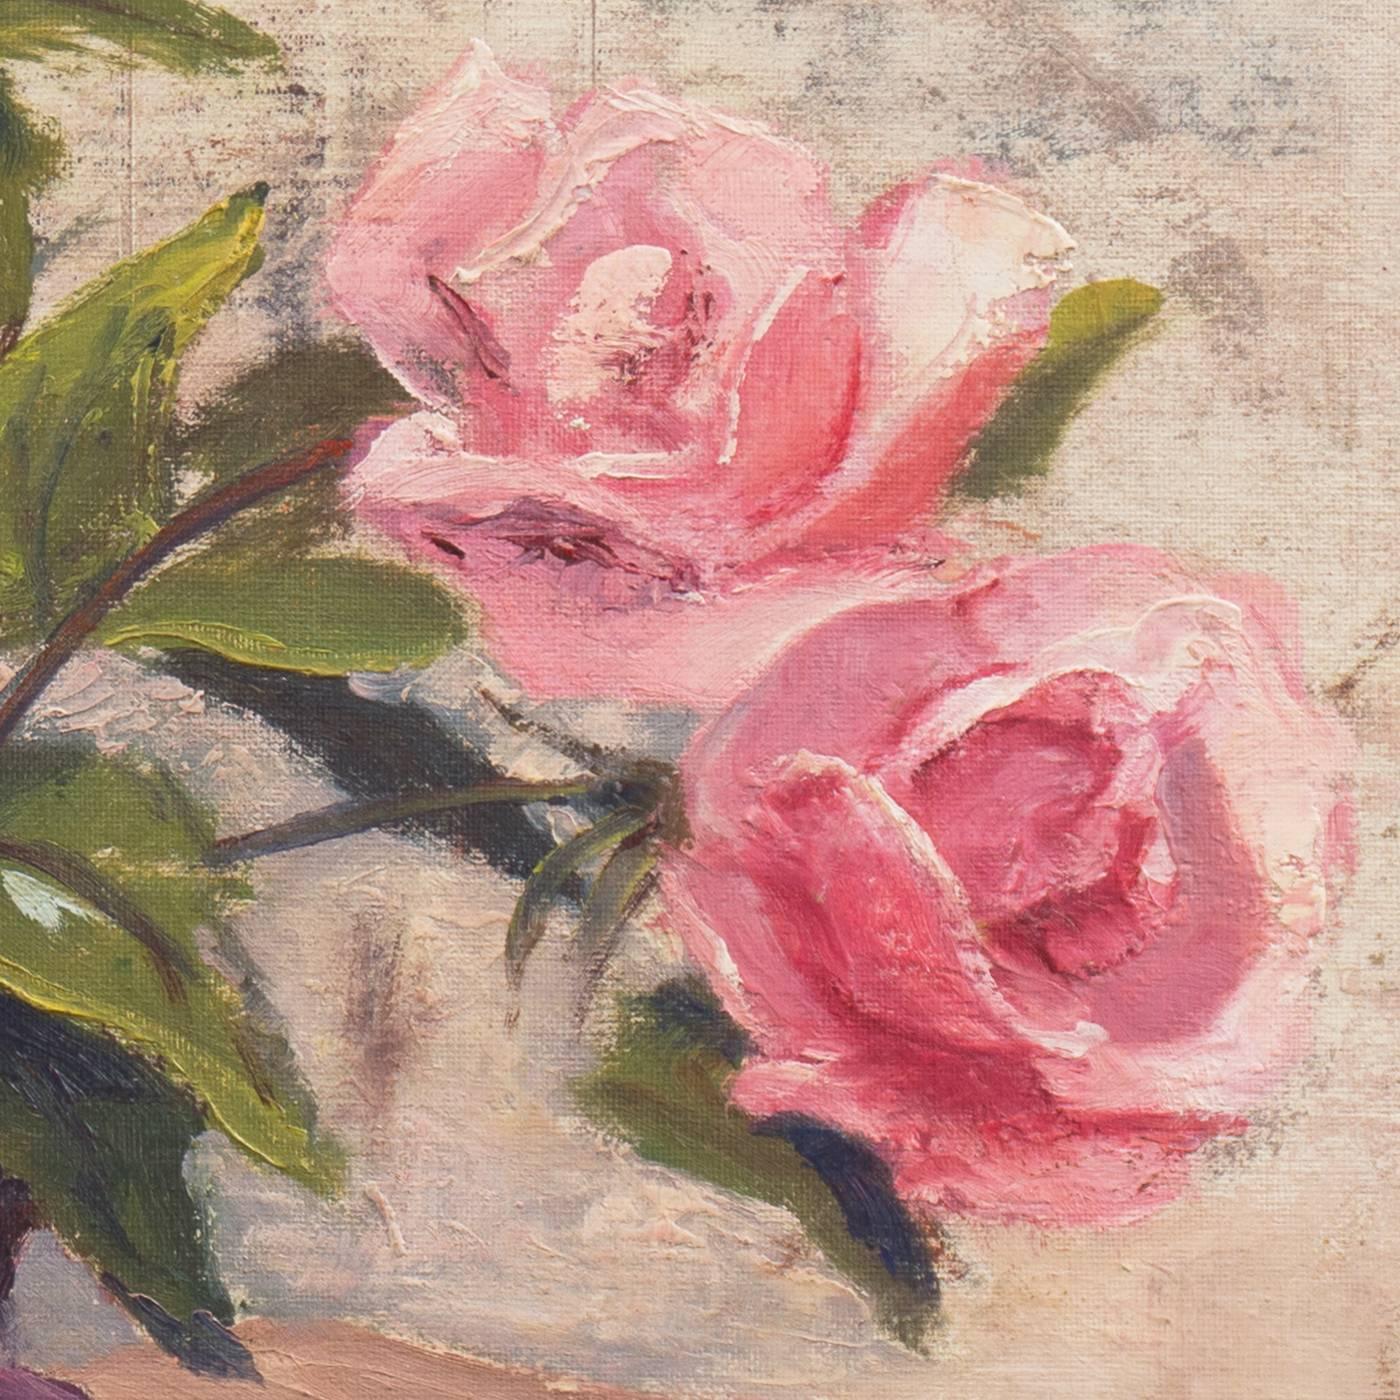 An elegant still-life of apricot-pink roses shown informally arranged in a plum-colored vase contrasted against a scumbled ivory and parchment background. 

Signed lower left 'Jon Blanchette'  (1908-1987) and painted circa 1955. 

Jon Blanchette was